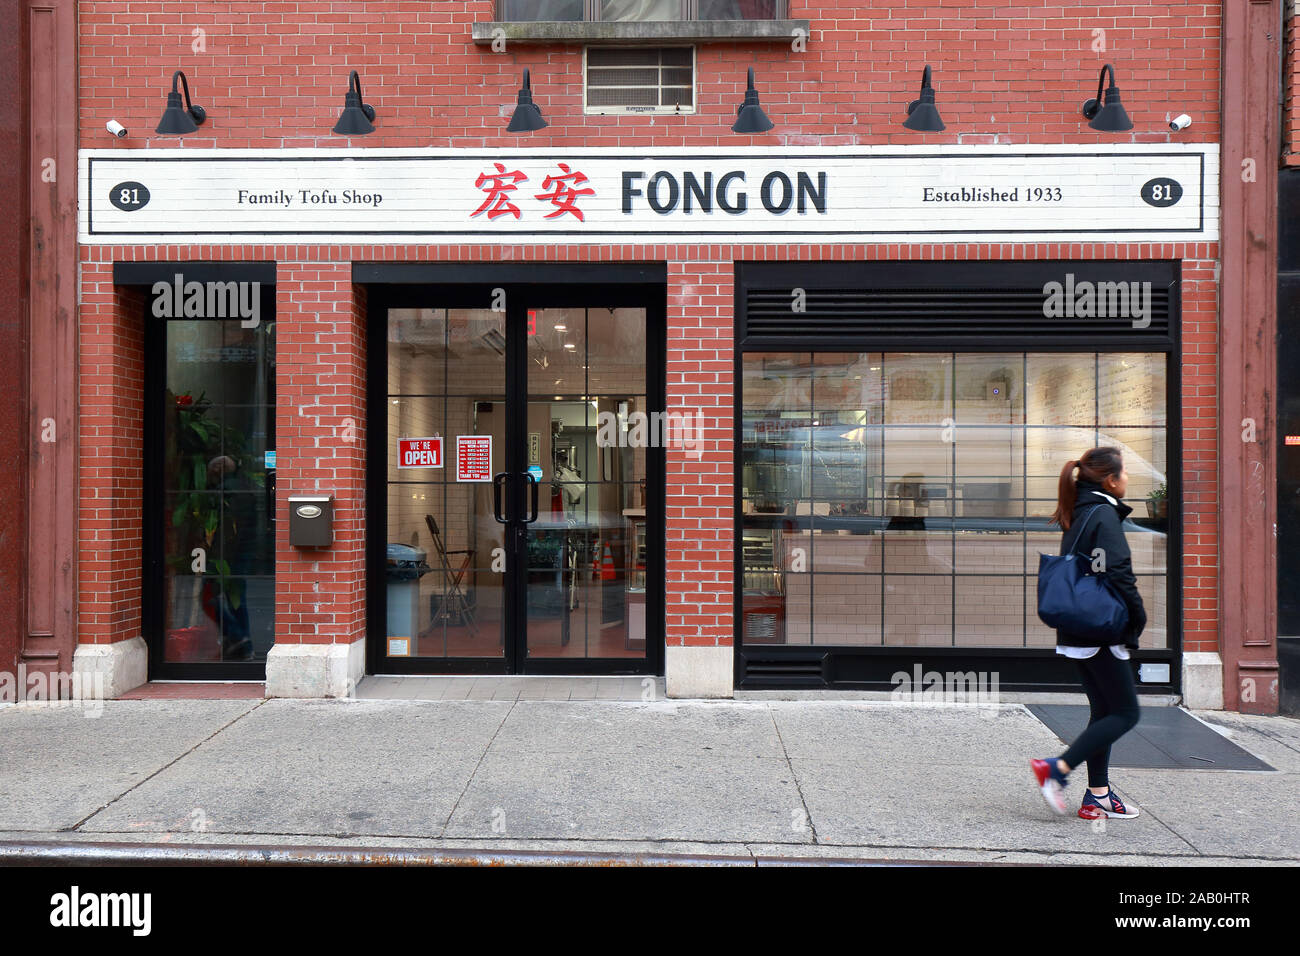 Fong On 宏安, 81 Division Street, New York, NY. exterior storefront of a tofu shop in Manhattan Chinatown Stock Photo